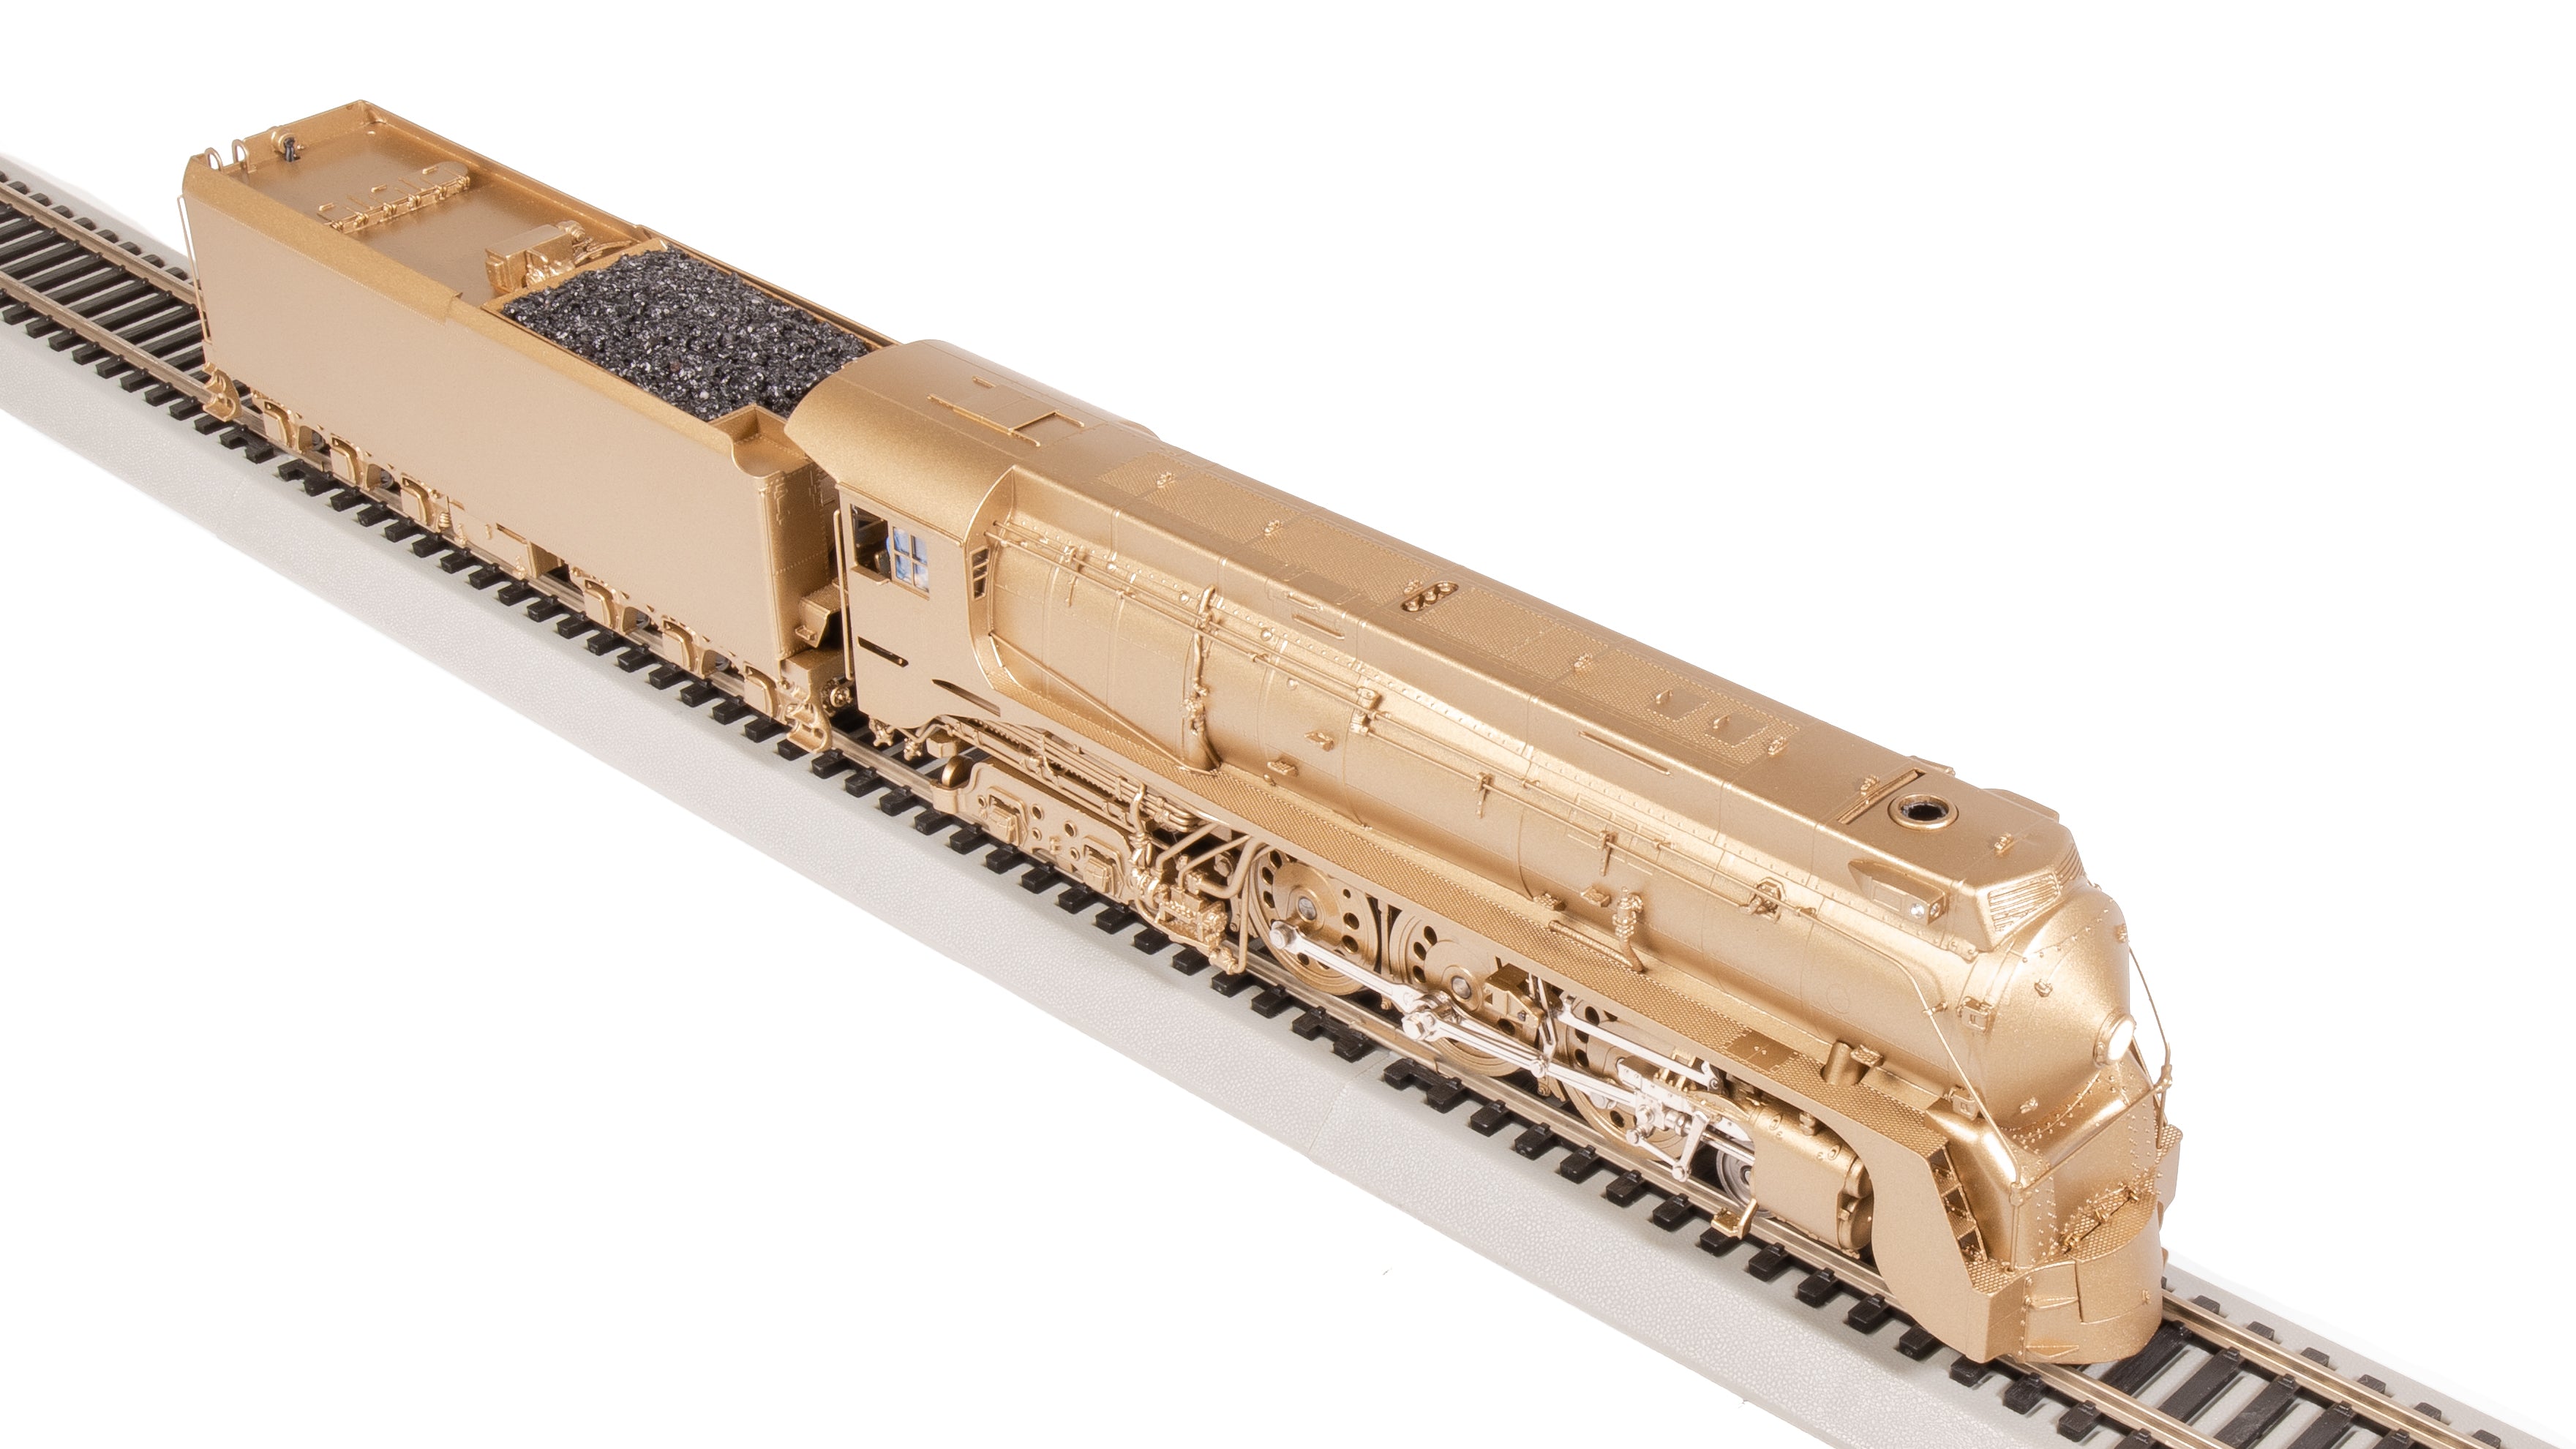 7878 New Haven I-5, Unlettered / Painted Brass, Paragon4 Sound/DC/DCC, Smoke, HO